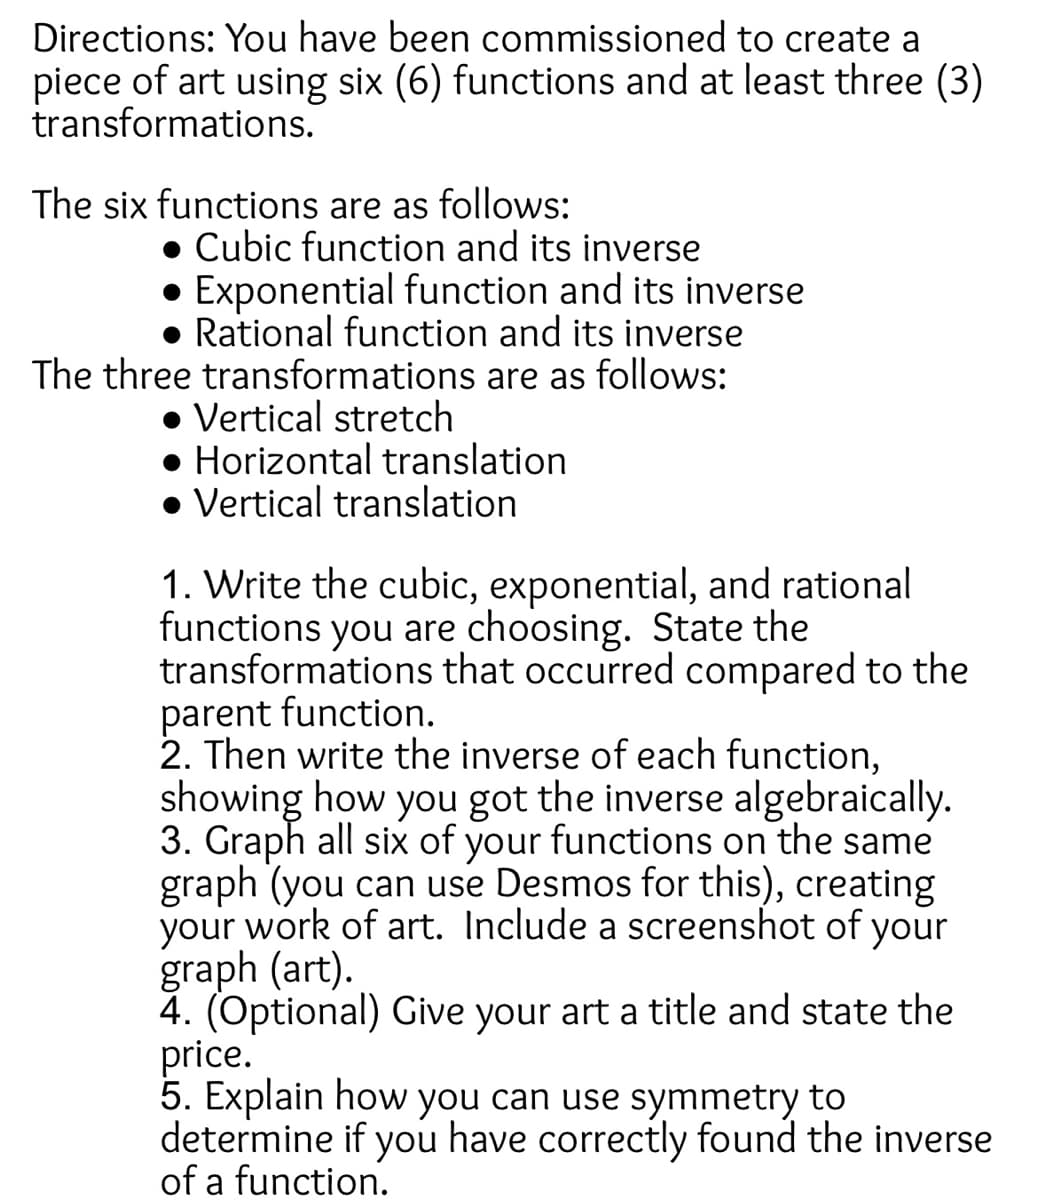 Directions: You have been commissioned to create a
piece of art using six (6) functions and at least three (3)
transformations.
The six functions are as follows:
• Cubic function and its inverse
• Exponential function and its inverse
● Rational function and its inverse
The three transformations are as follows:
• Vertical stretch
● Horizontal translation
• Vertical translation
1. Write the cubic, exponential, and rational
functions you are choosing. State the
transformations that occurred compared to the
parent function.
2. Then write the inverse of each function,
showing how you got the inverse algebraically.
3. Graph all six of your functions on the same
graph (you can use Desmos for this), creating
your work of art. Include a screenshot of your
graph (art).
4. (Optional) Give your art a title and state the
price.
5. Explain how you can use symmetry to
determine if you have correctly found the inverse
of a function.